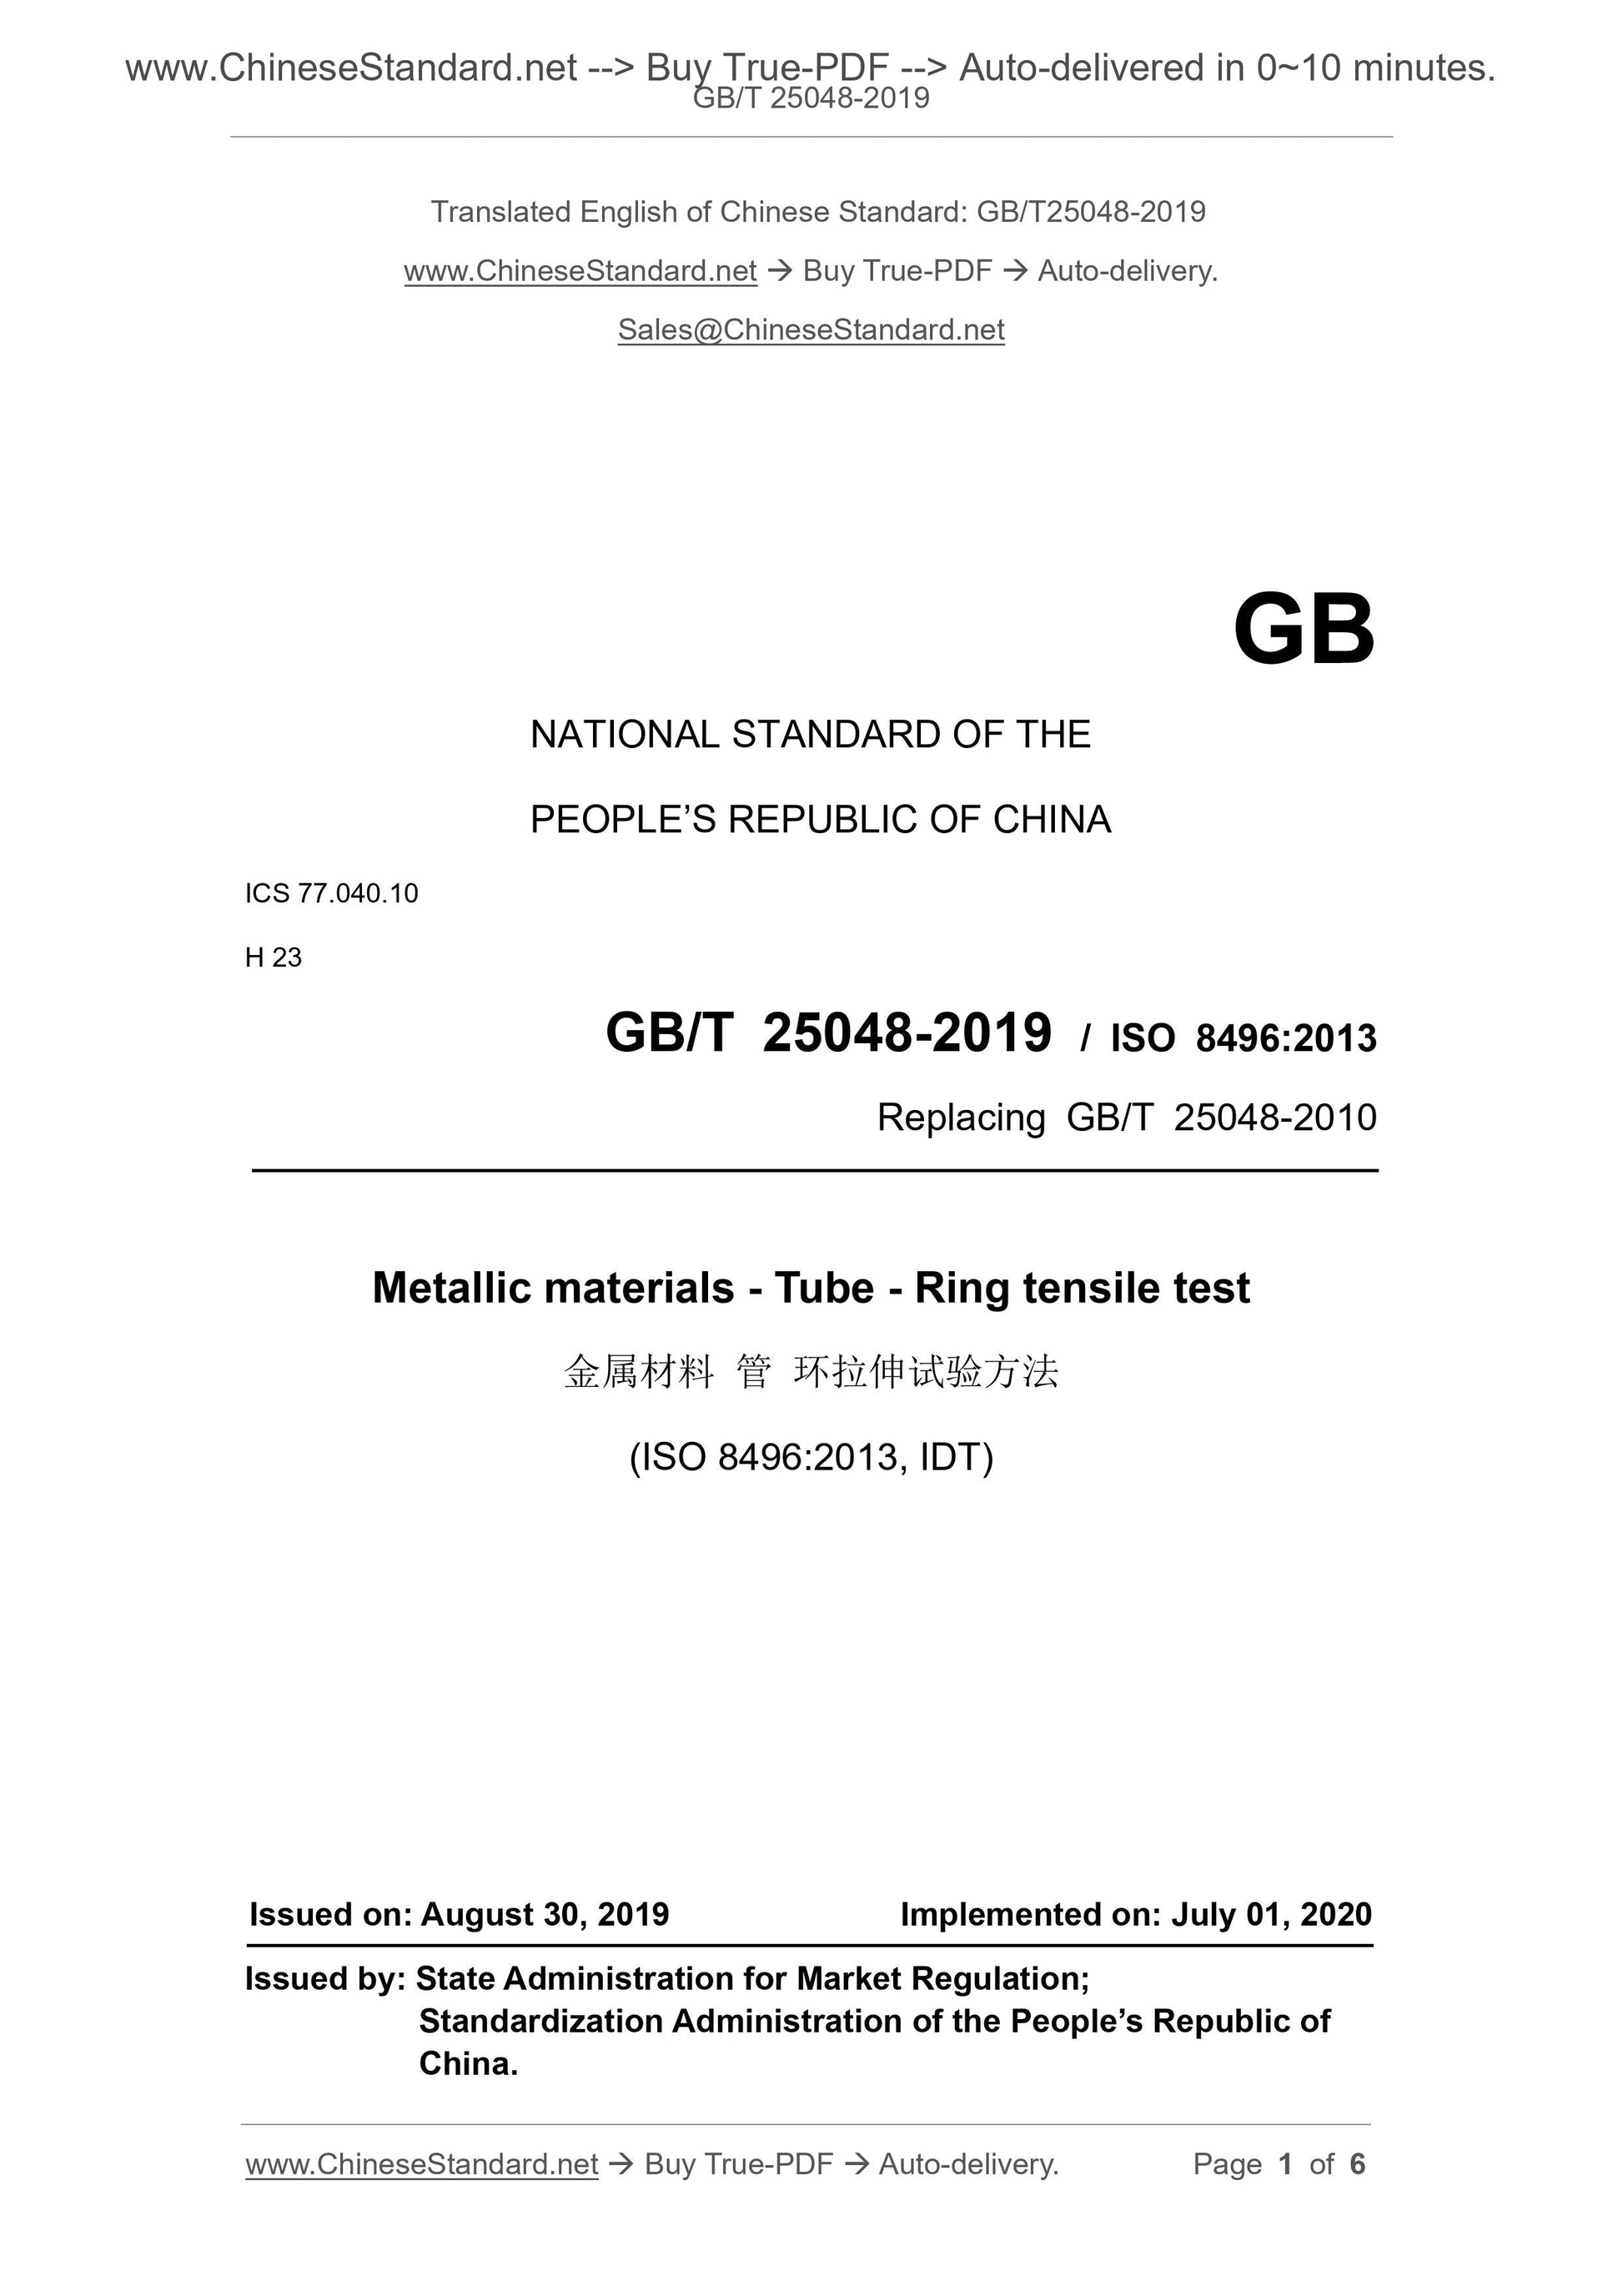 GB/T 25048-2019 Page 1